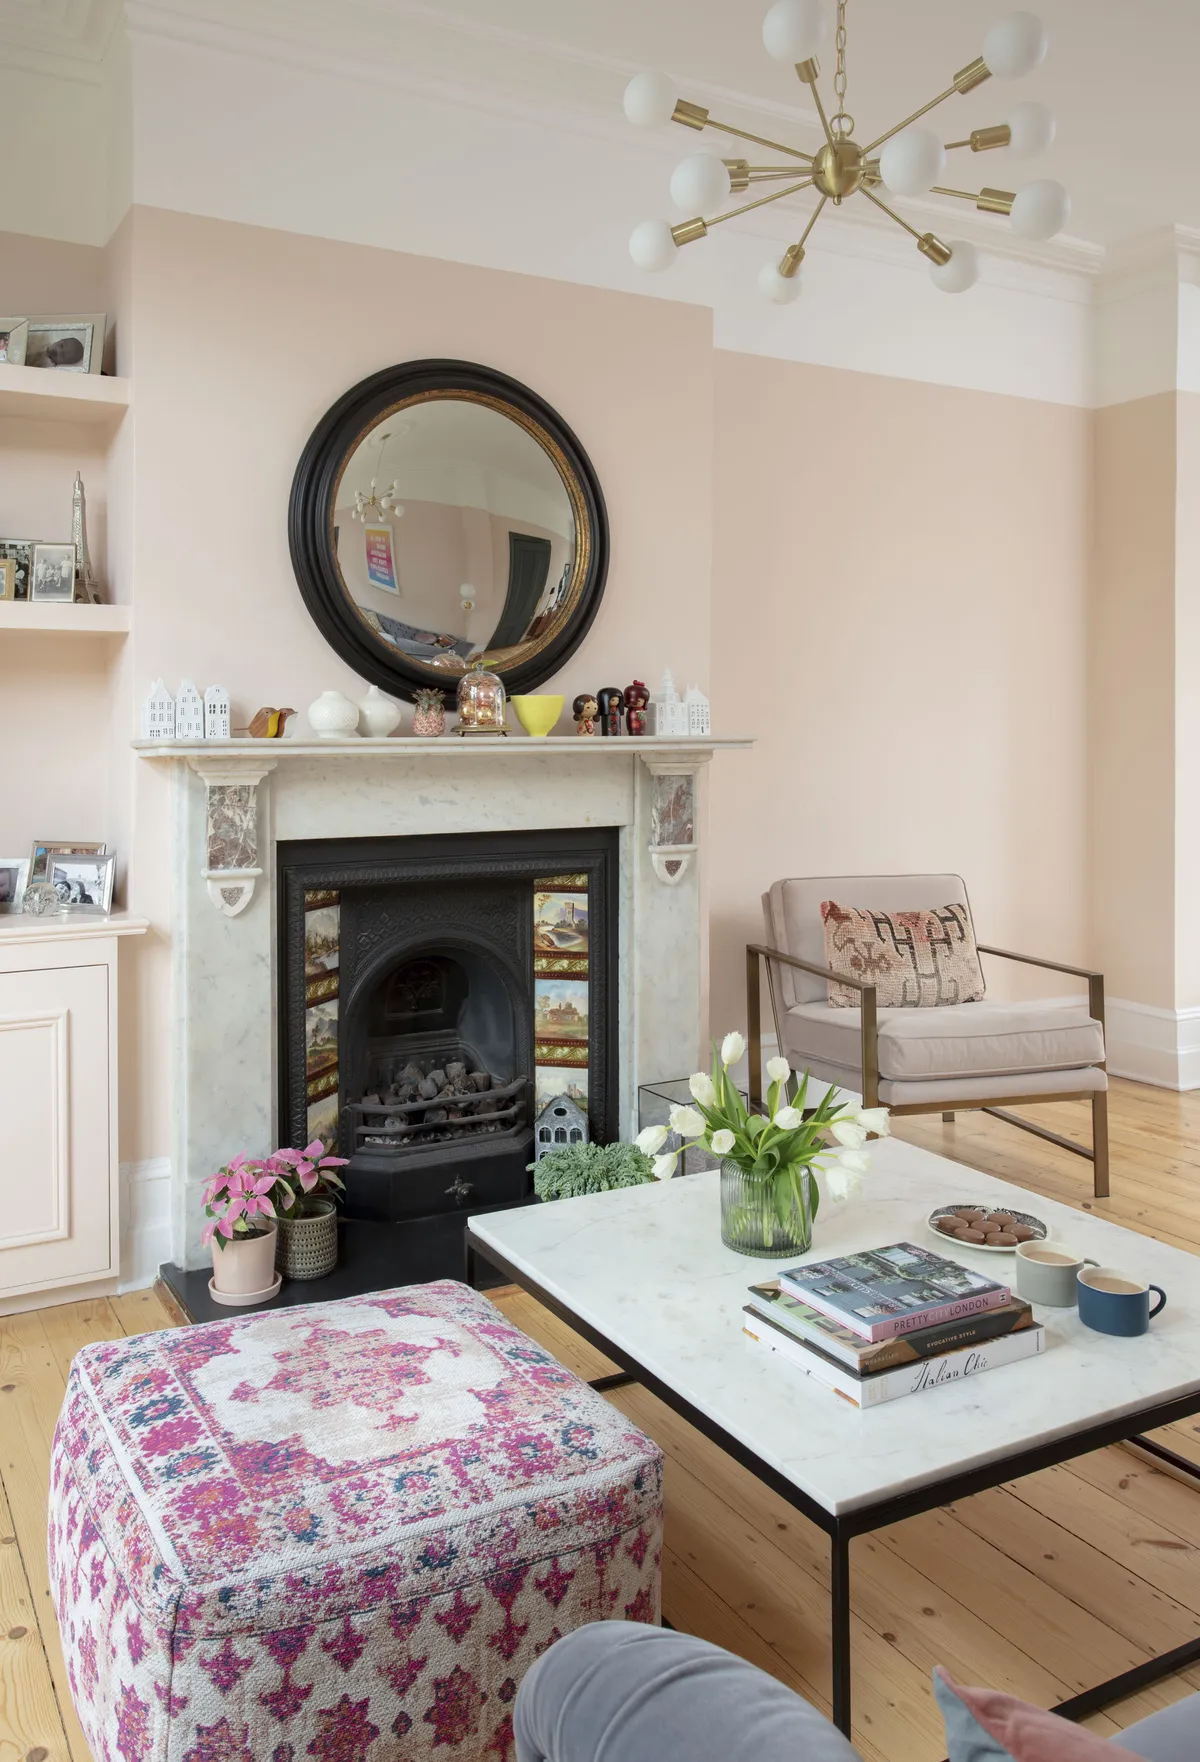 Living room makeover: 'Our chic take on Miami pastels is calm and sleek'